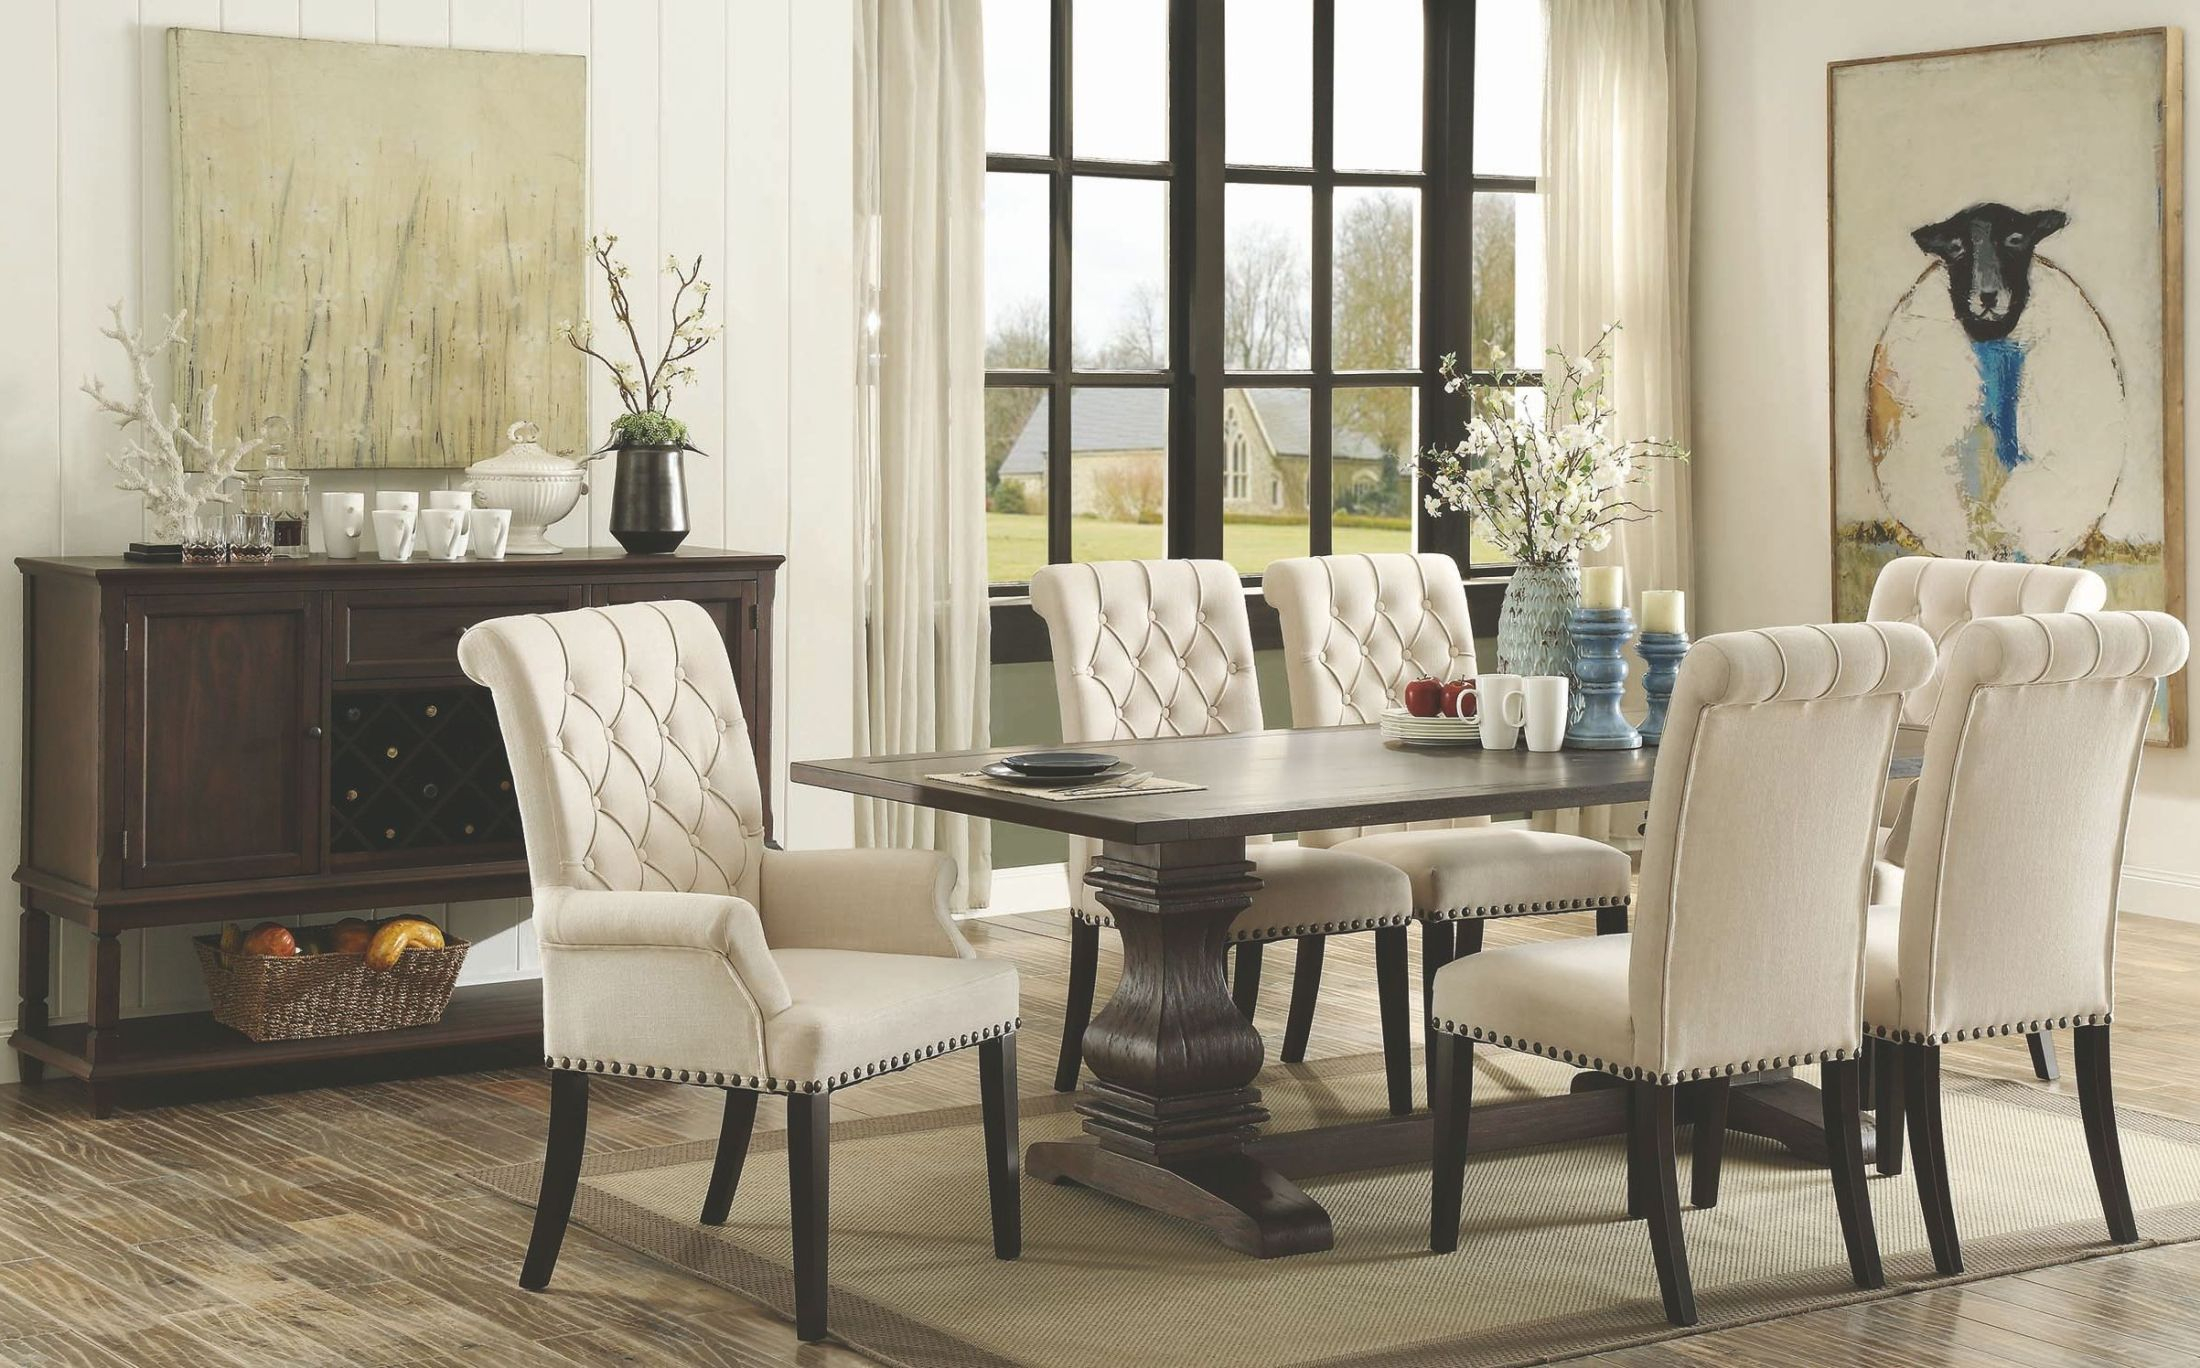 Attractive Dining Room Sets Coaster Parkins Rustic Espresso in sizing 2200 X 1368